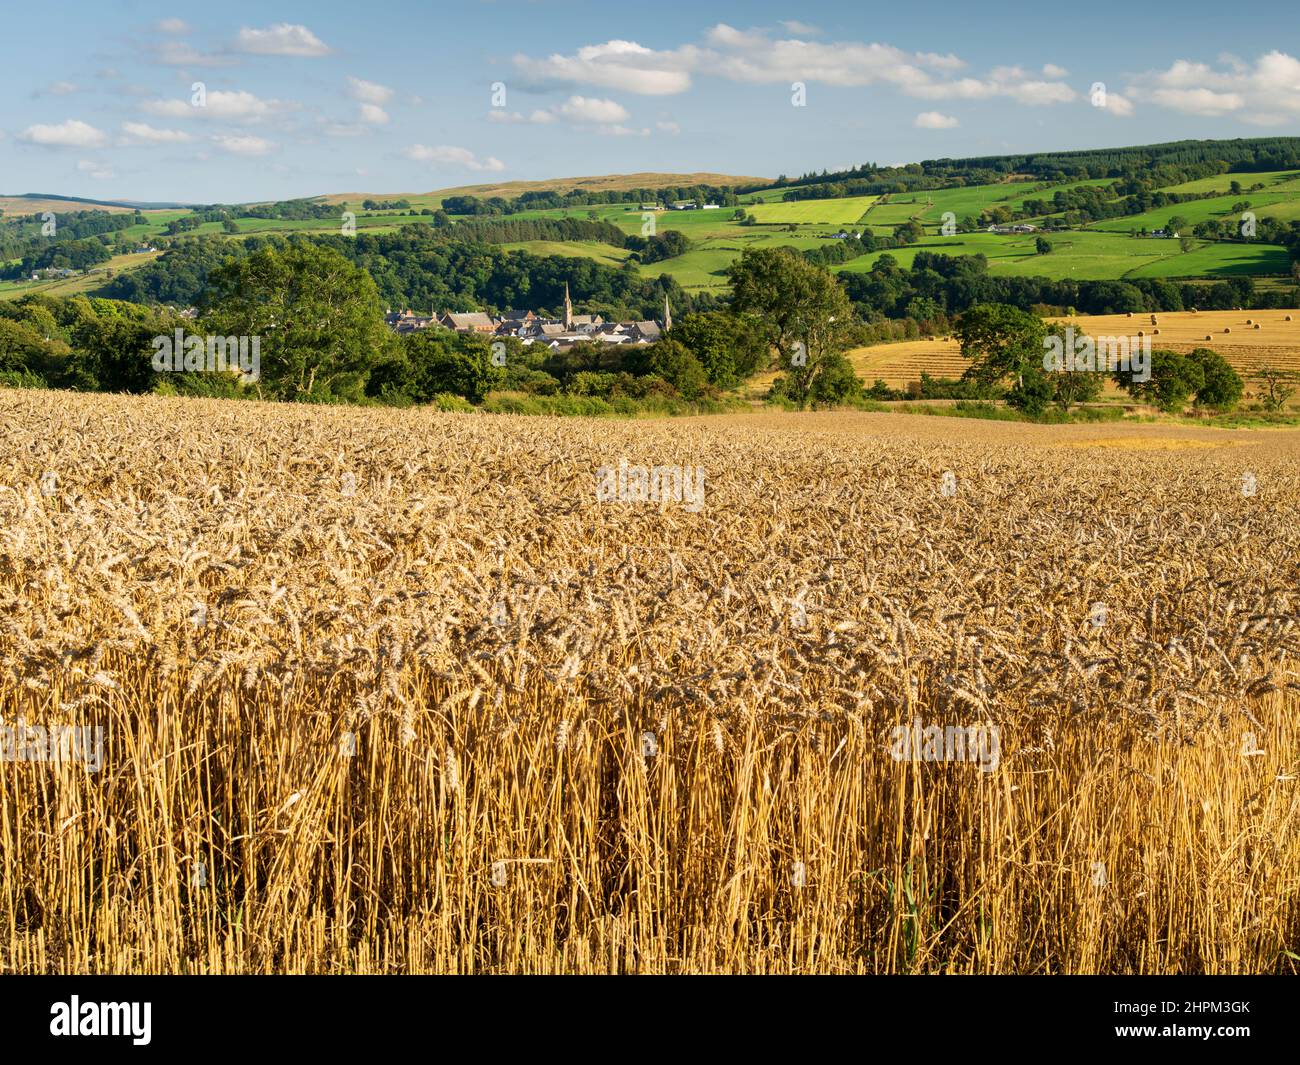 A view overlooking the former lace town of Darvel in East Ayrshire, Scotland, with a field of ripe wheat in the foreground. Stock Photo